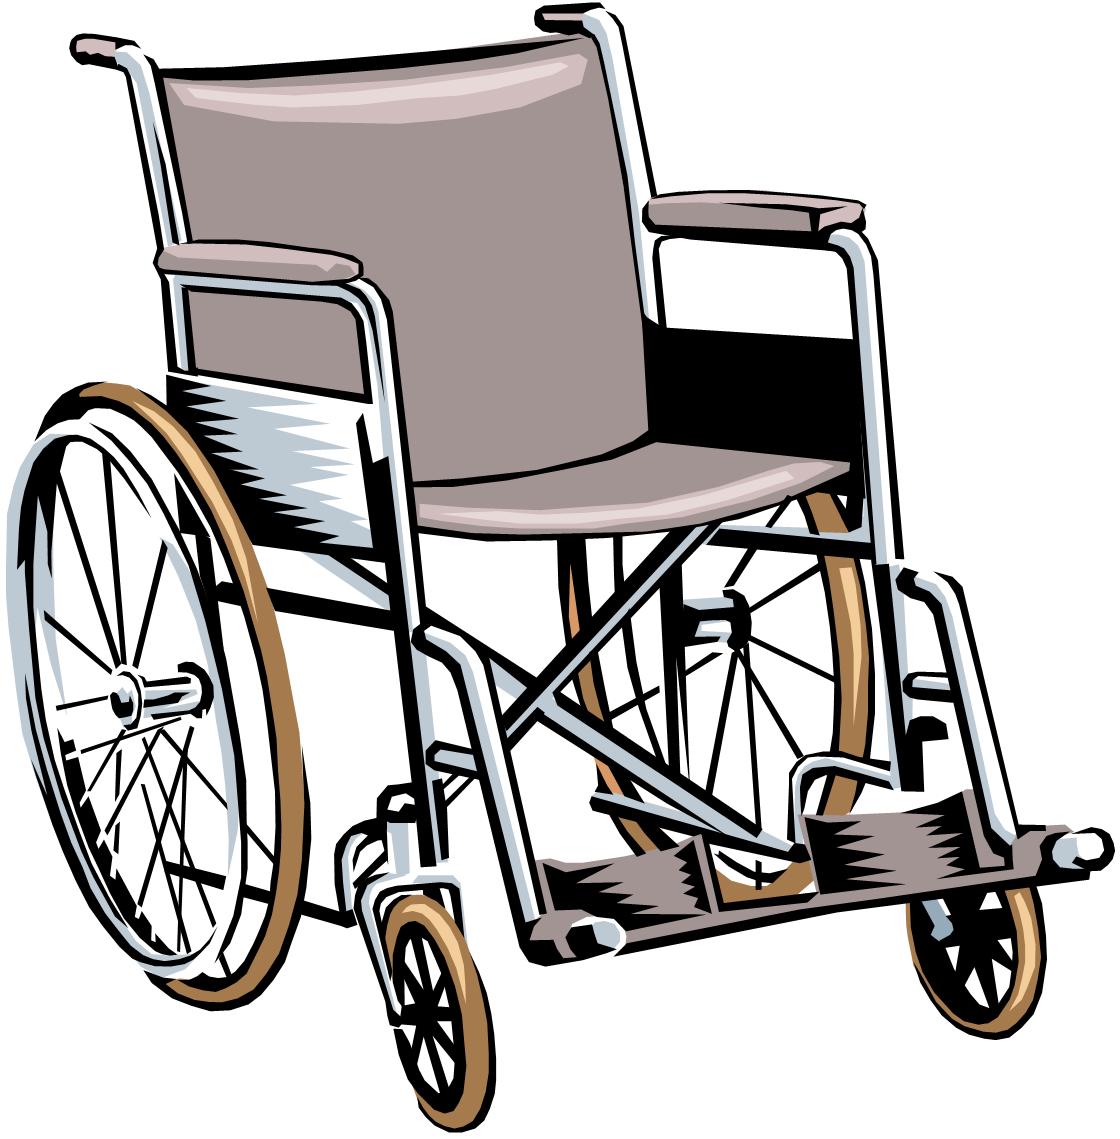 Free wheelchairs cliparts.